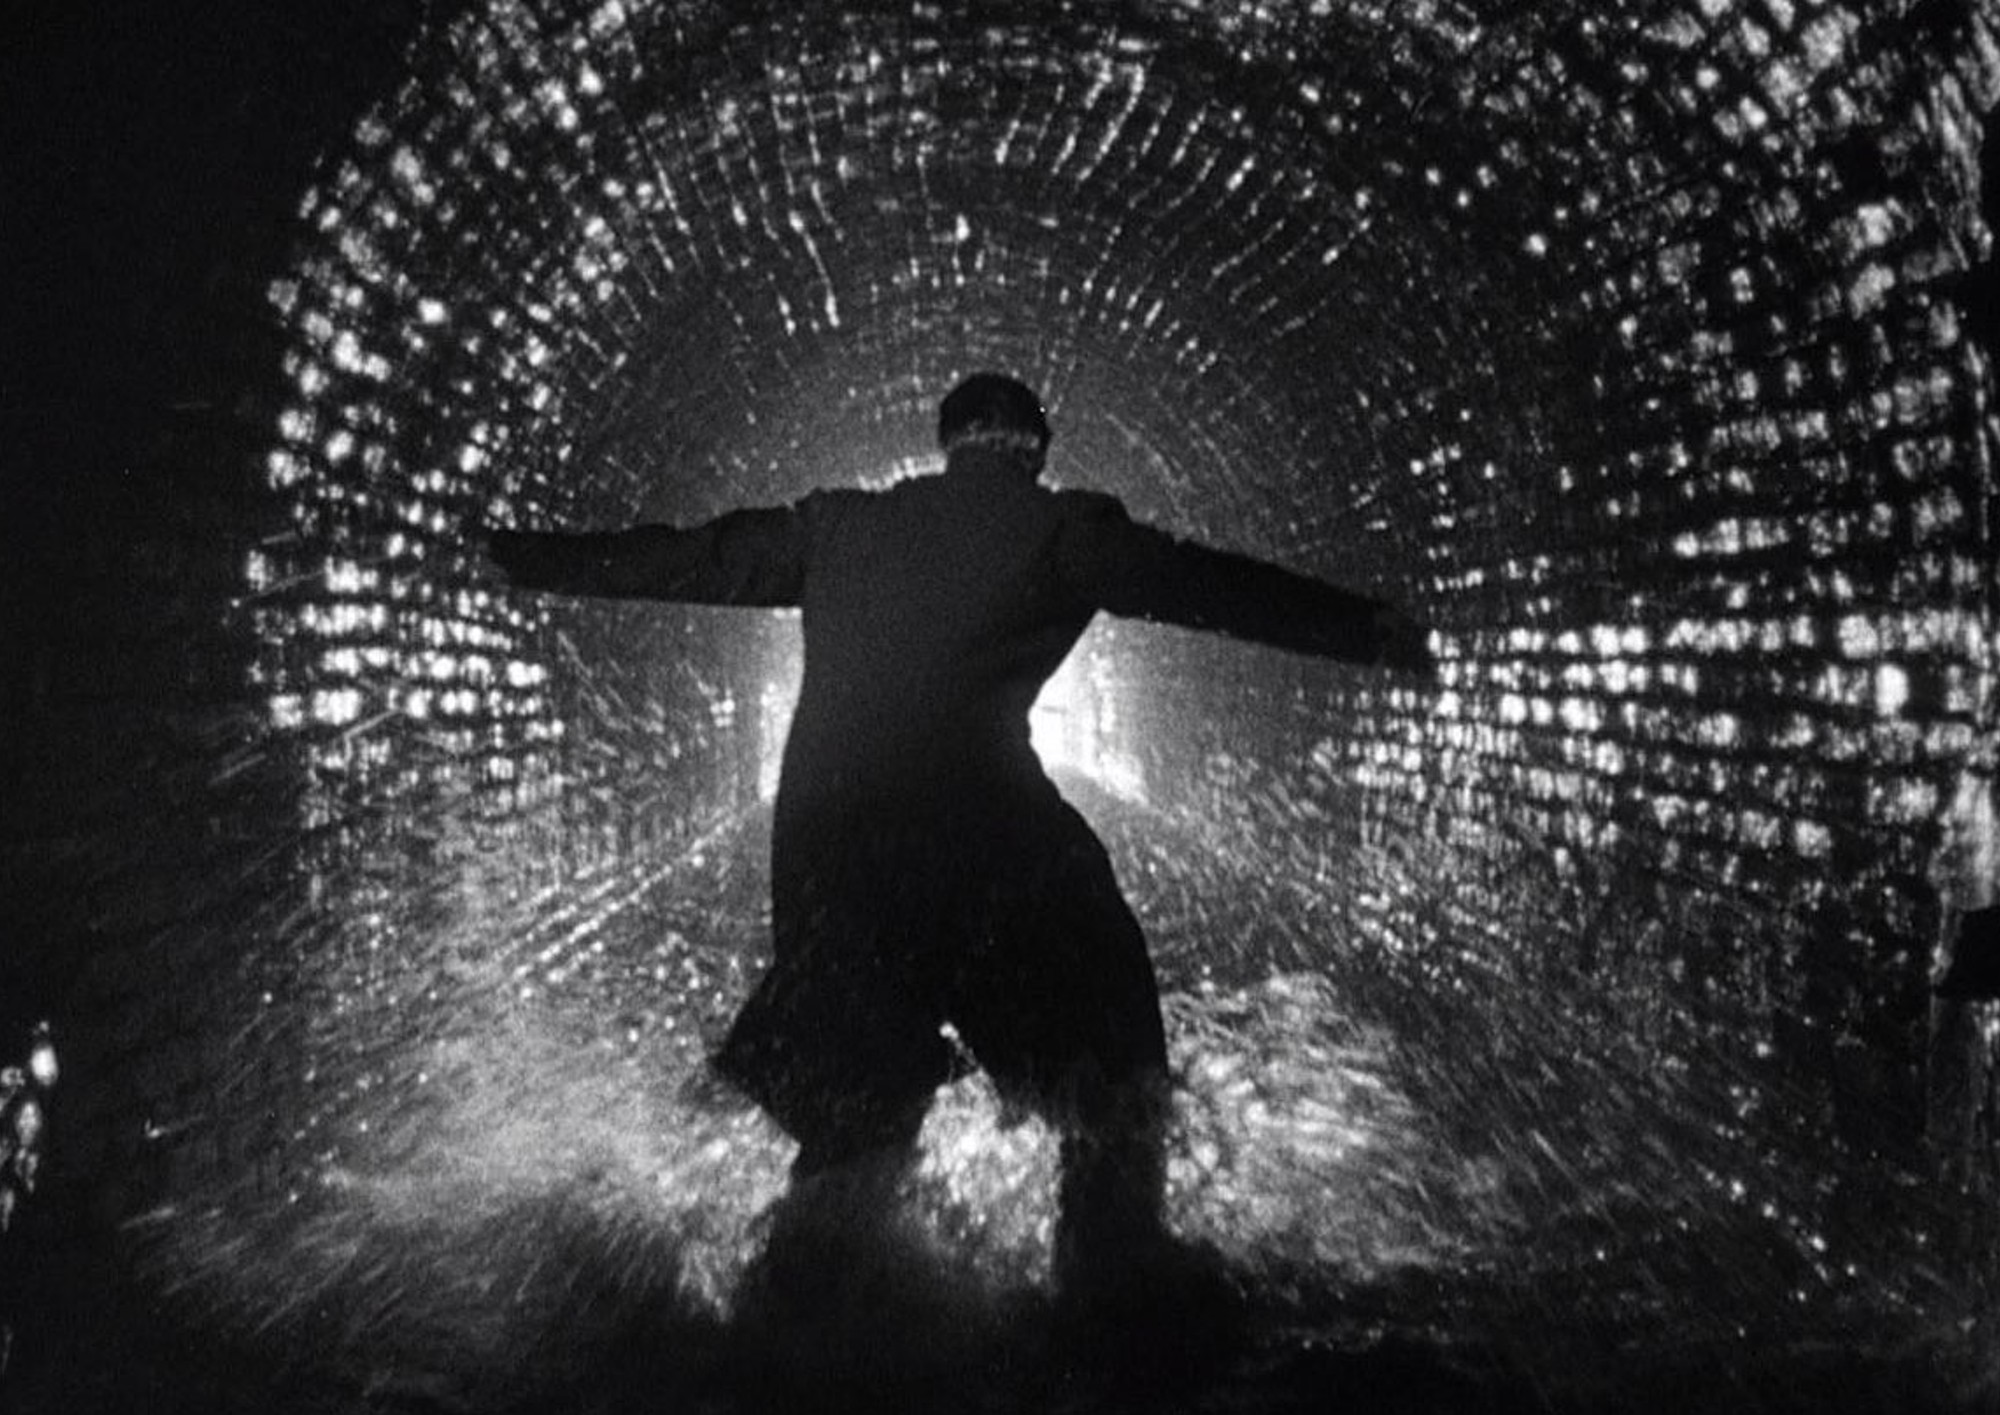 Image from the motion picture The Third Man